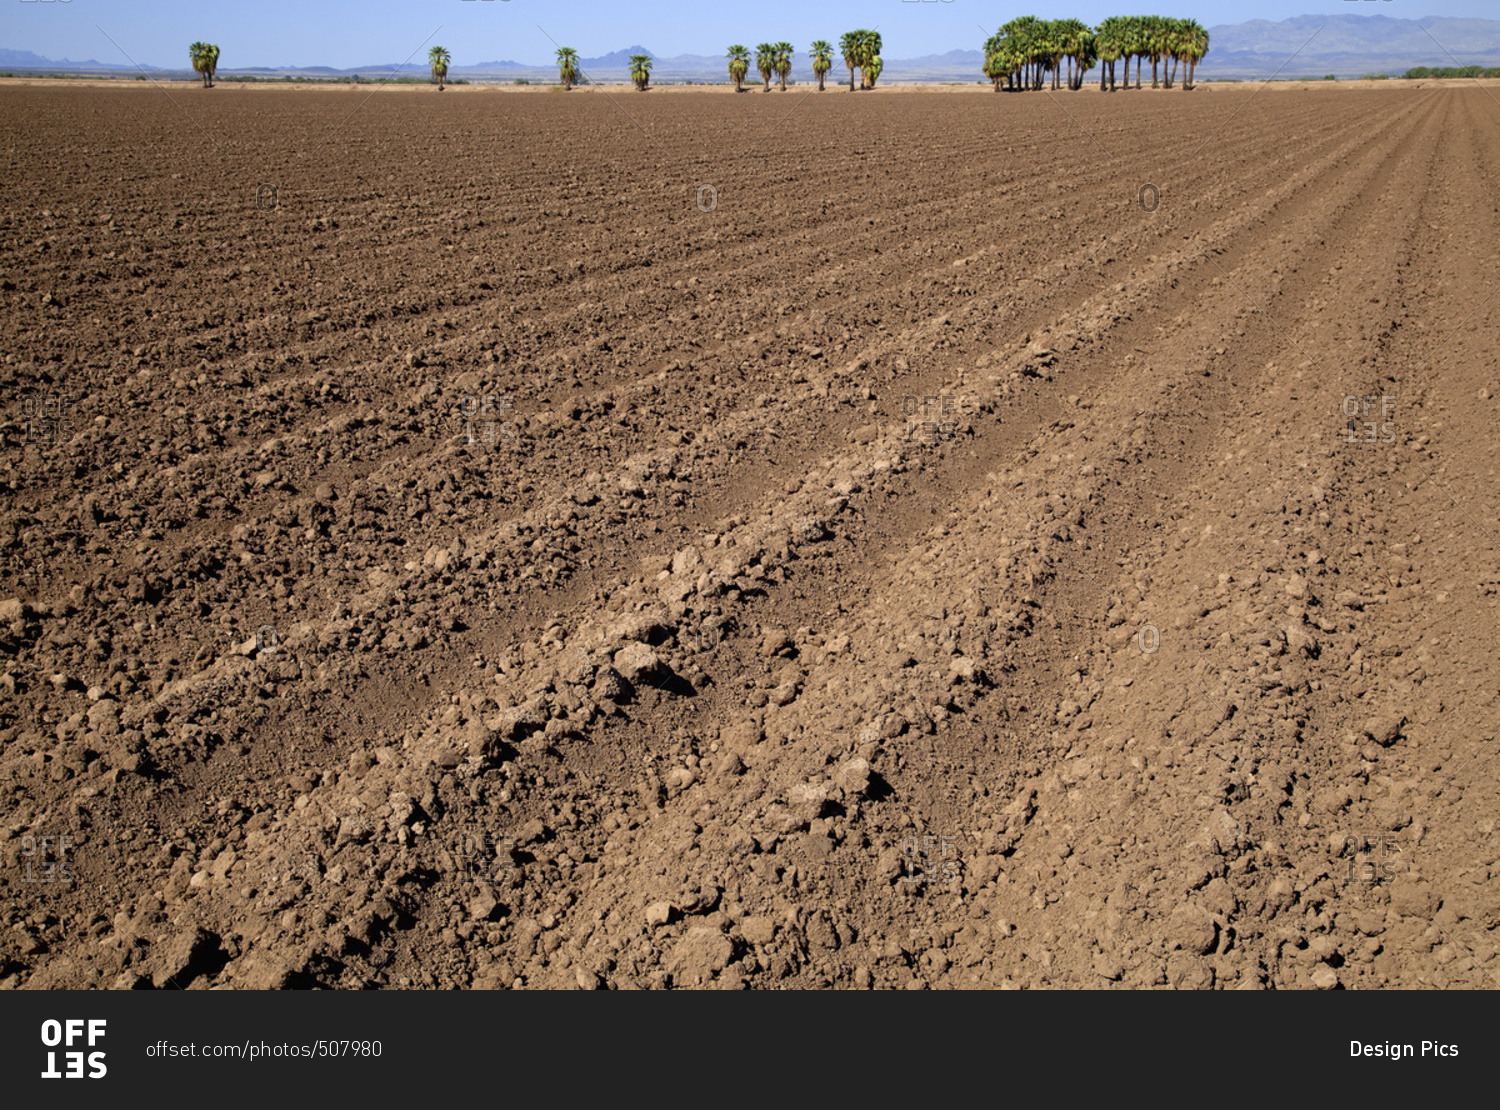 A plowed field in autumn awaits planting of the next crop, palm trees, mountains and blue sky are in the background, near Ehernsburg; Arizona, United States of America